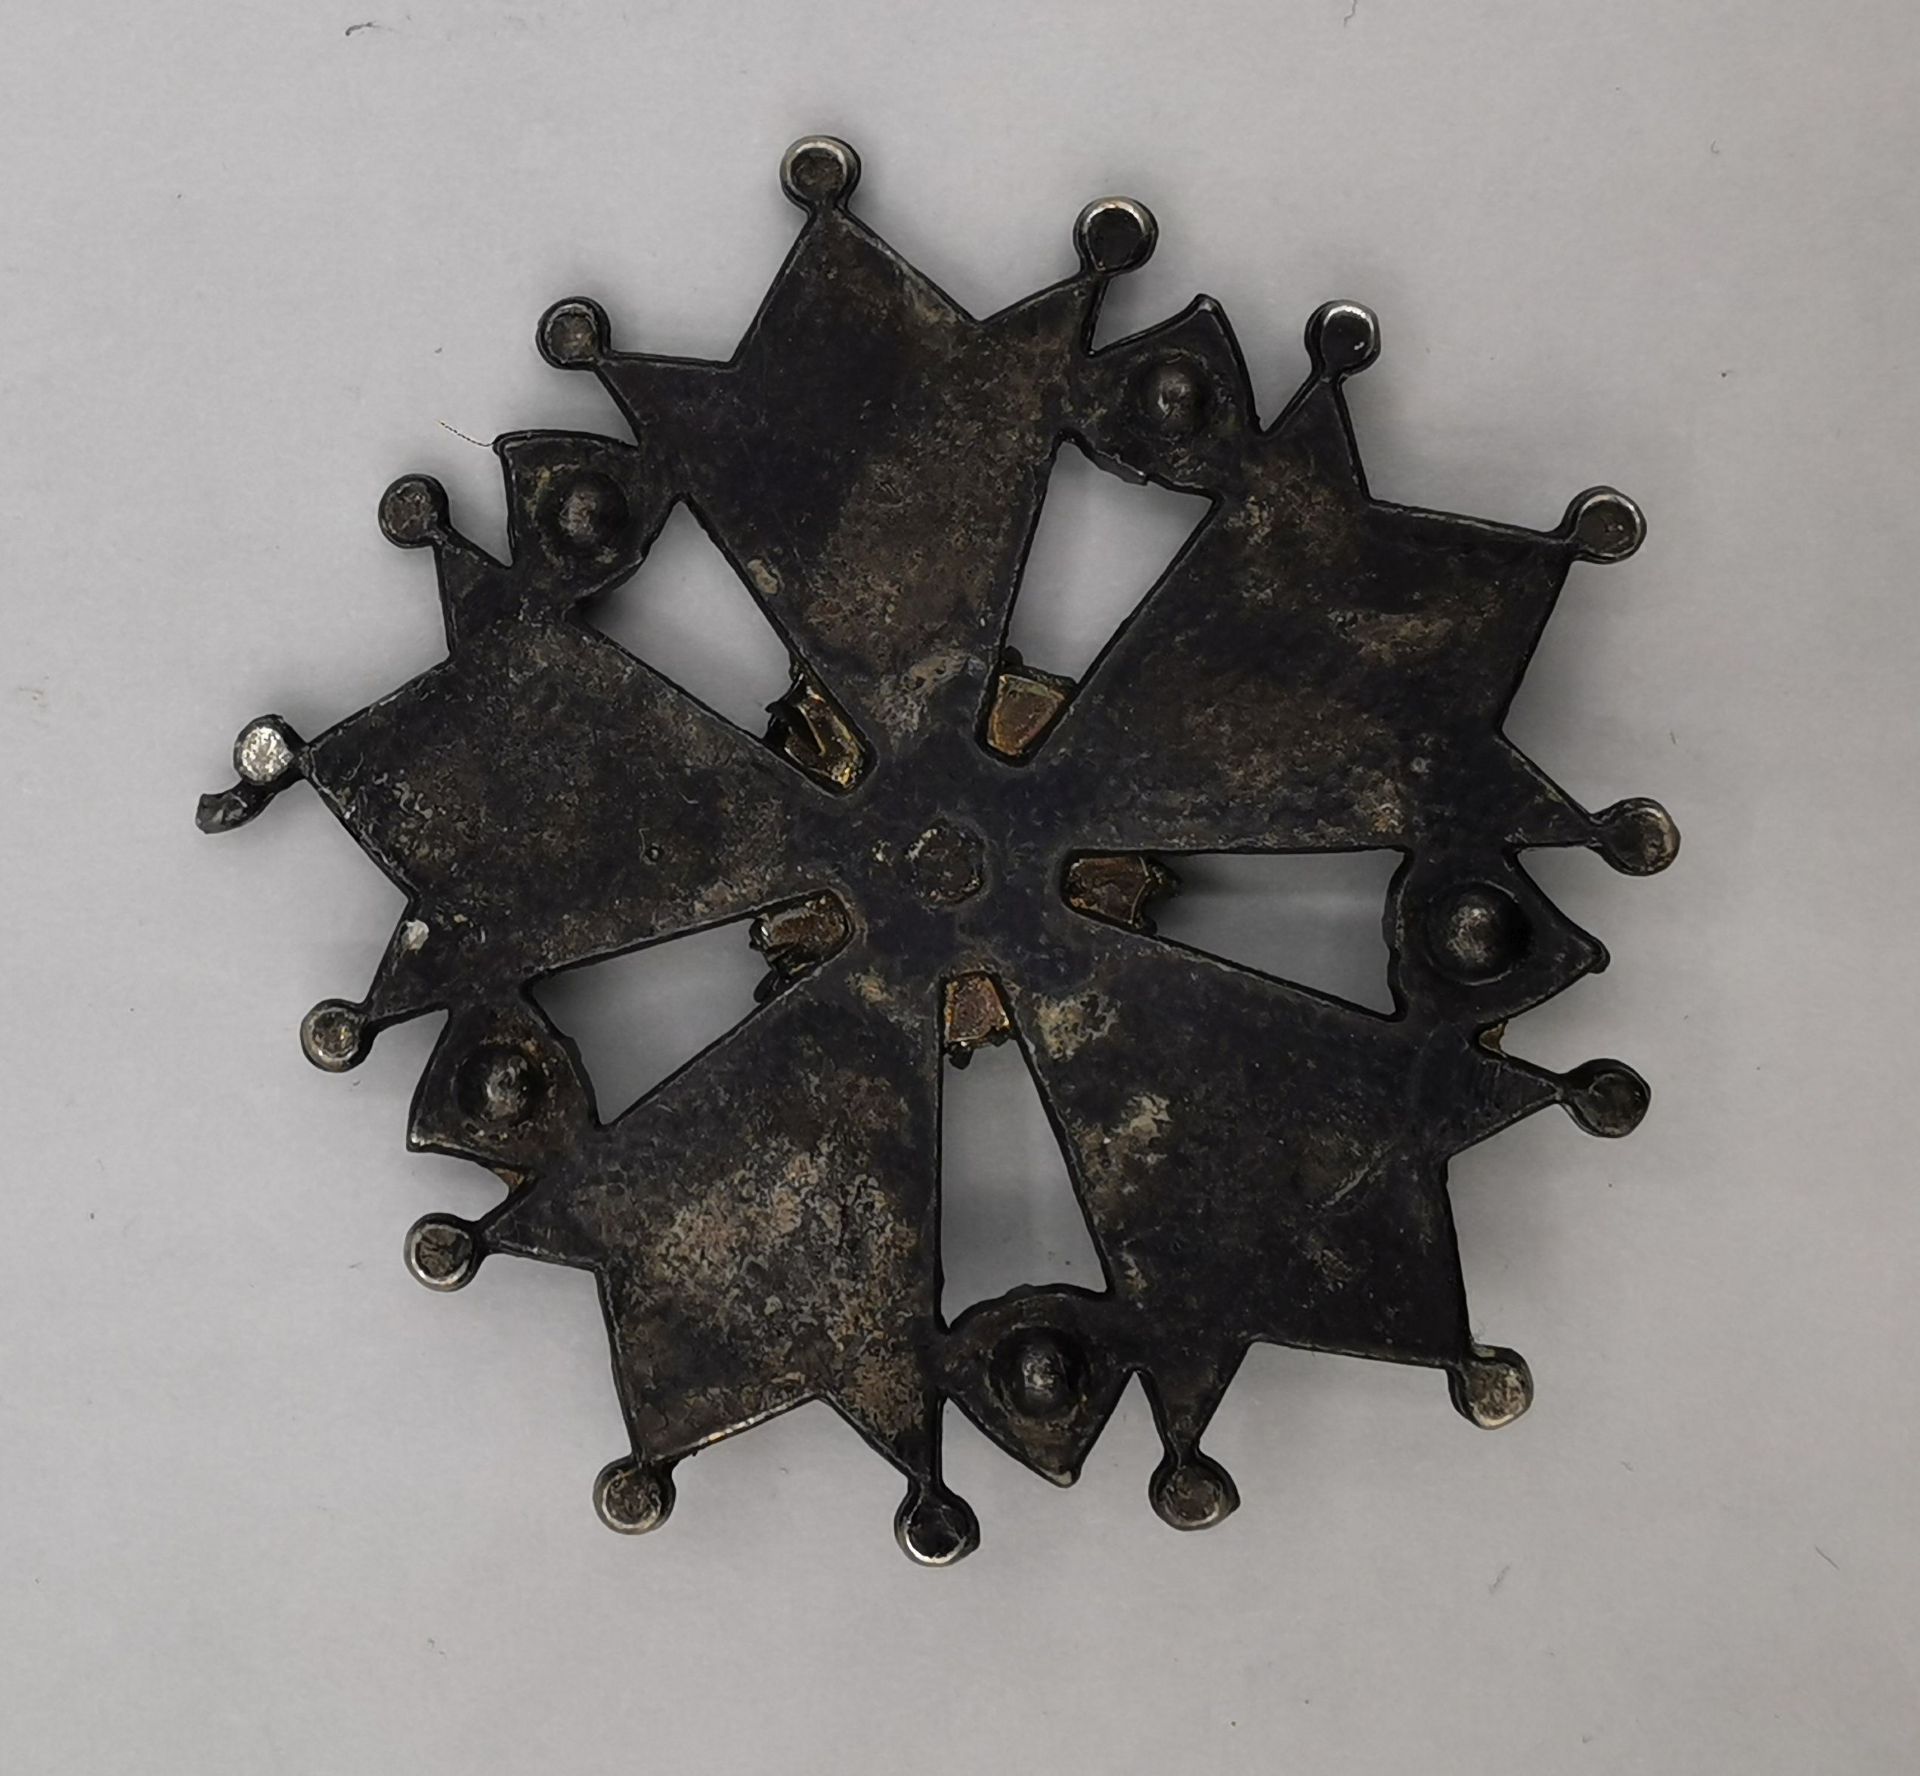 MEDAL / BADGE OF HONOUR - STAR-SHAPED MEDAL WITH STONE TRIM - Image 3 of 3